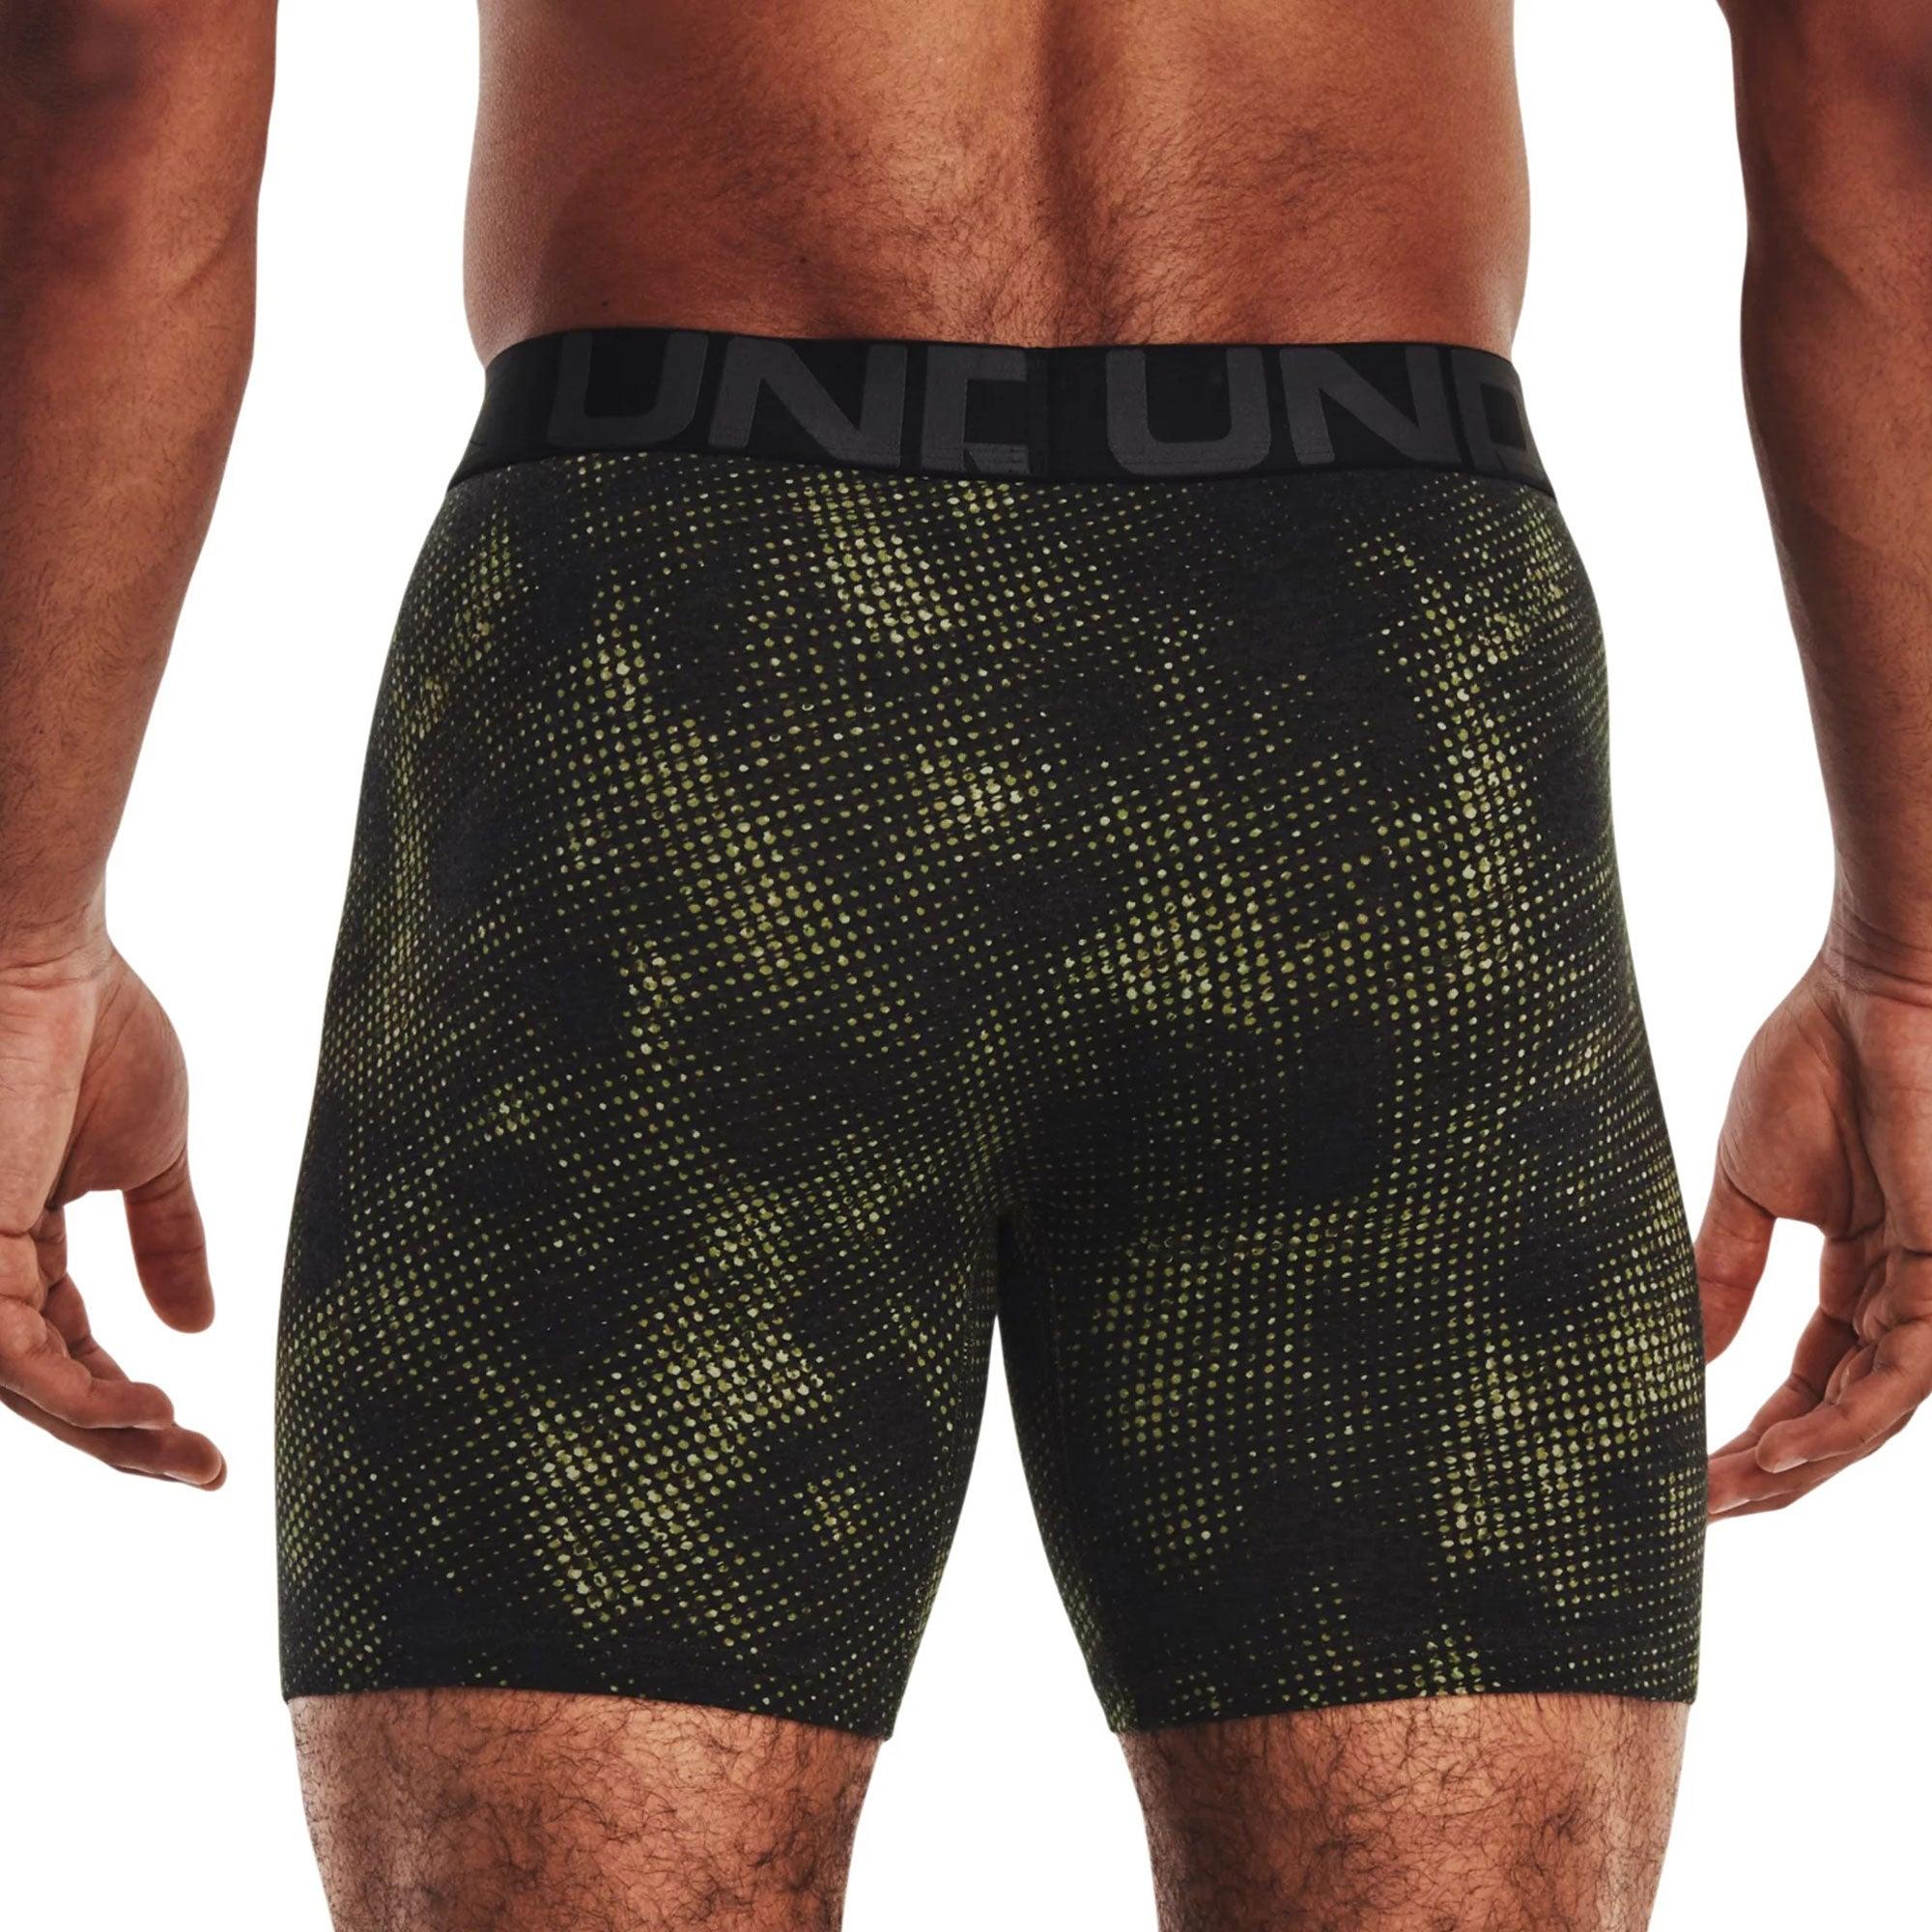 Đồ lót thể thao nam Under Armour Cc 6In Novelty 3 Pack - 1363615-005